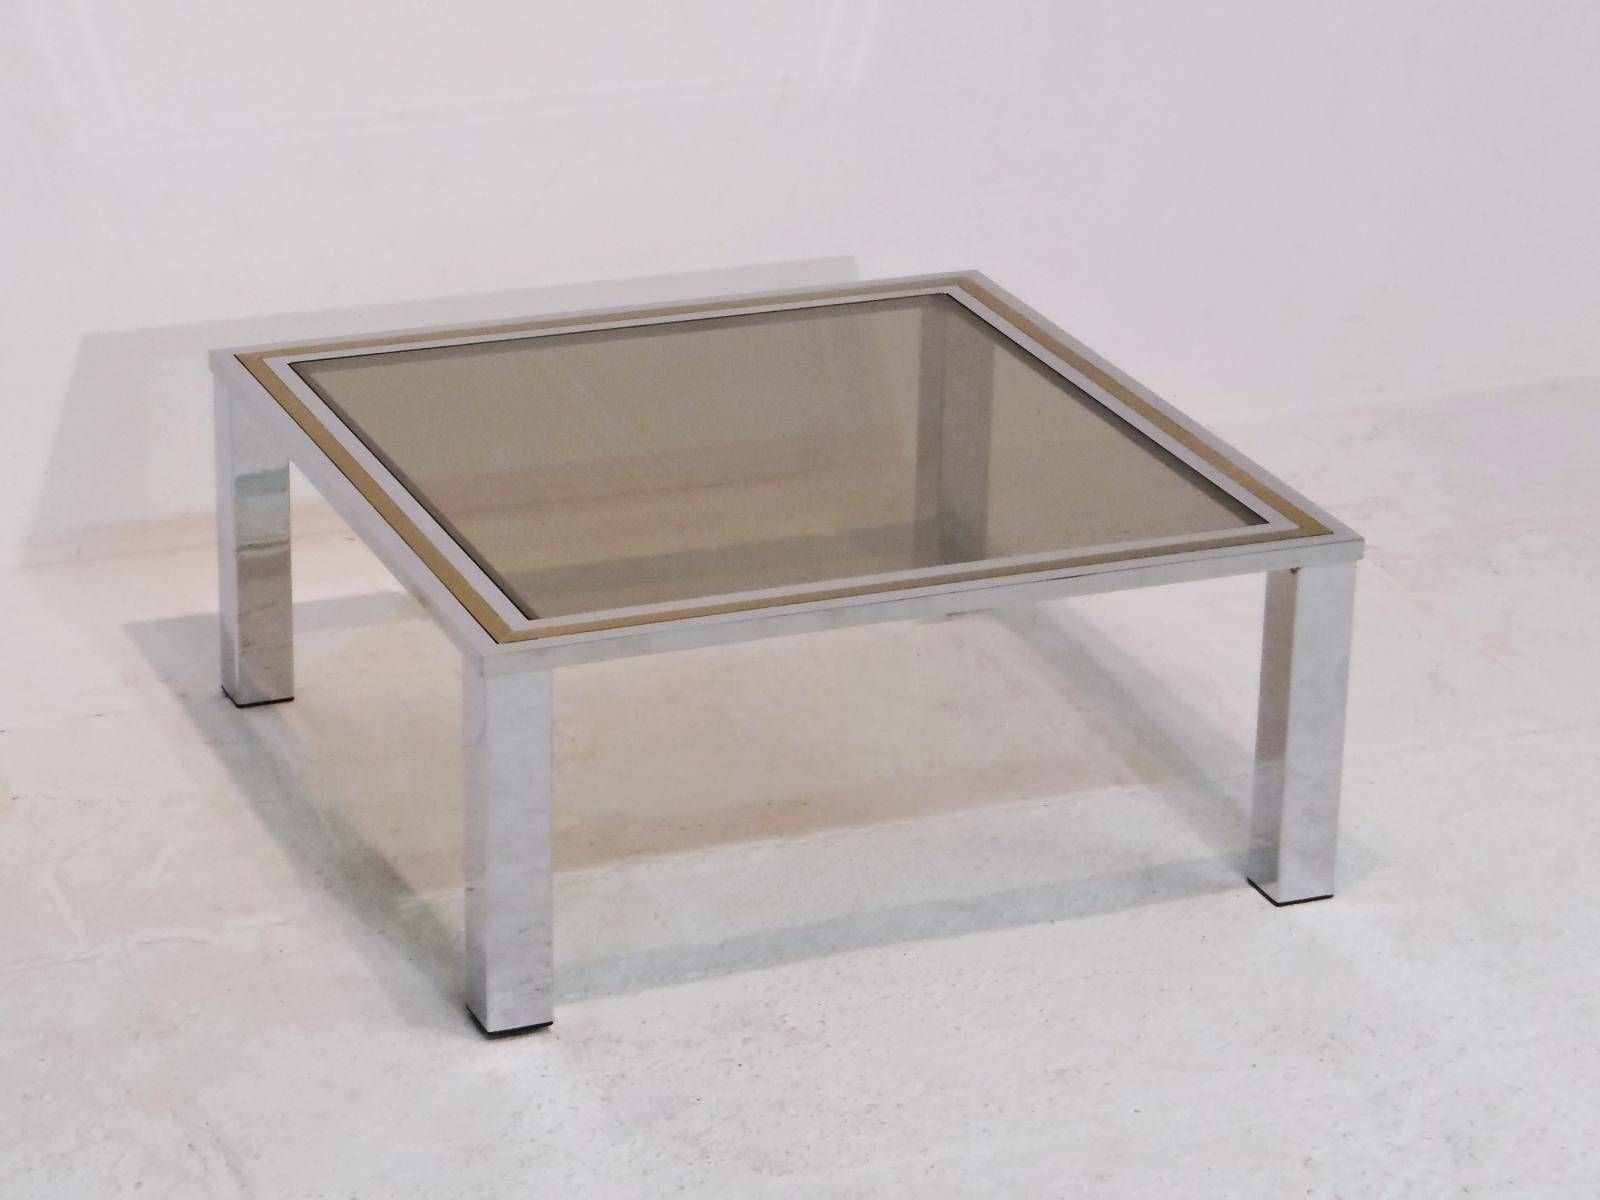 Vintage Coffee Table With Smoked Glass Top For Sale At Pamono Intended For Retro Smoked Glass Coffee Tables (View 17 of 30)